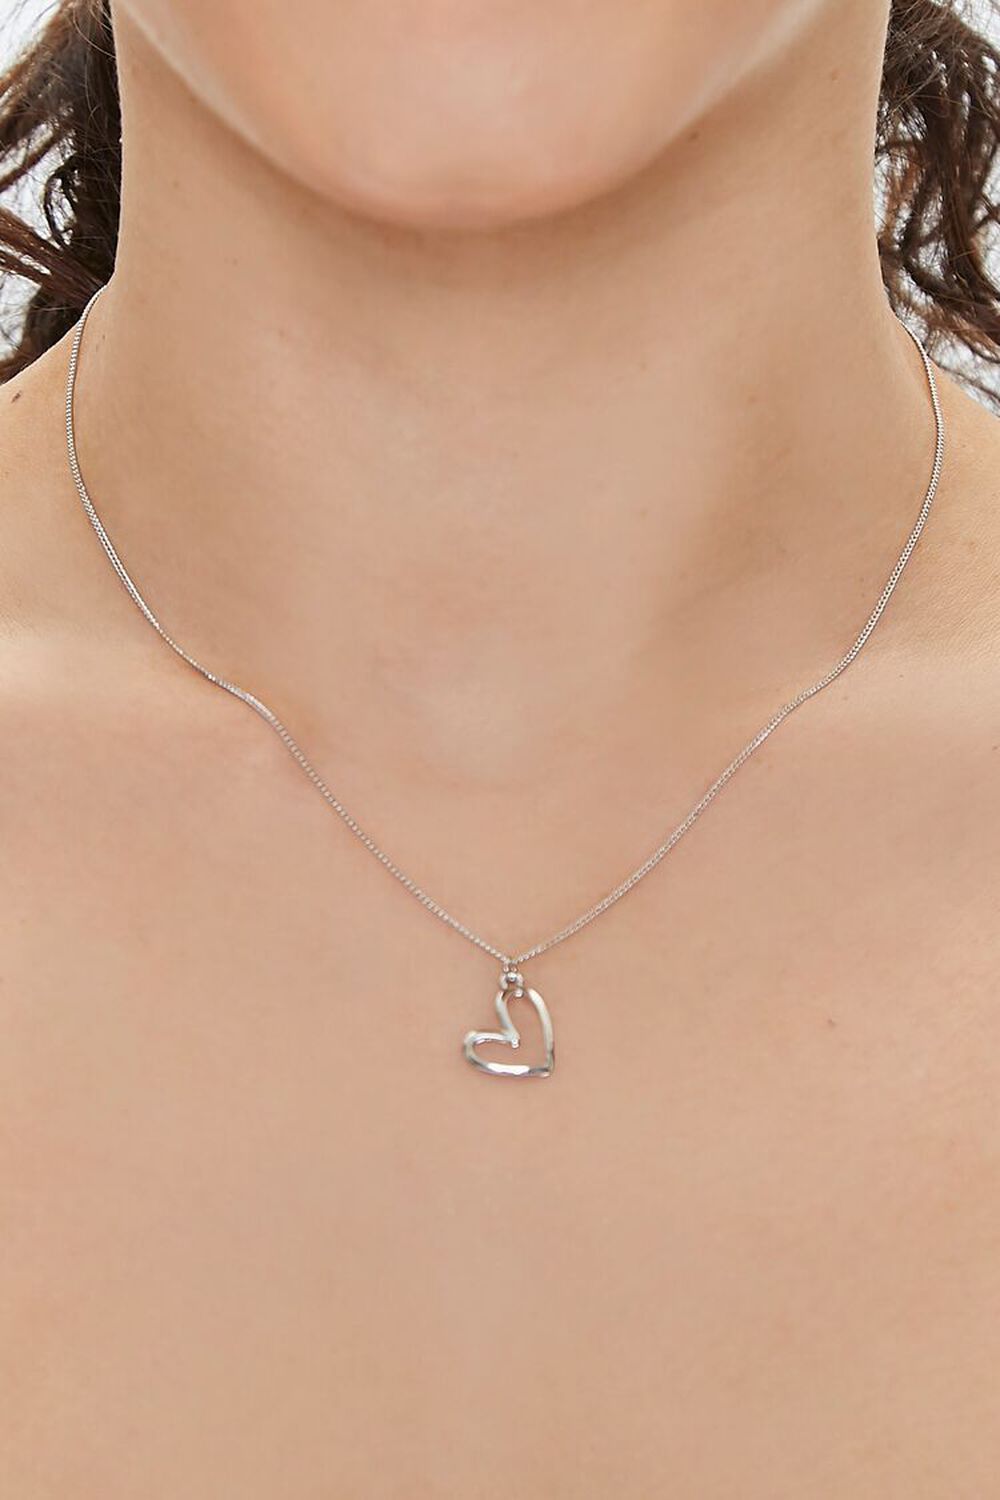 SILVER Cutout Heart Charm Necklace, image 1